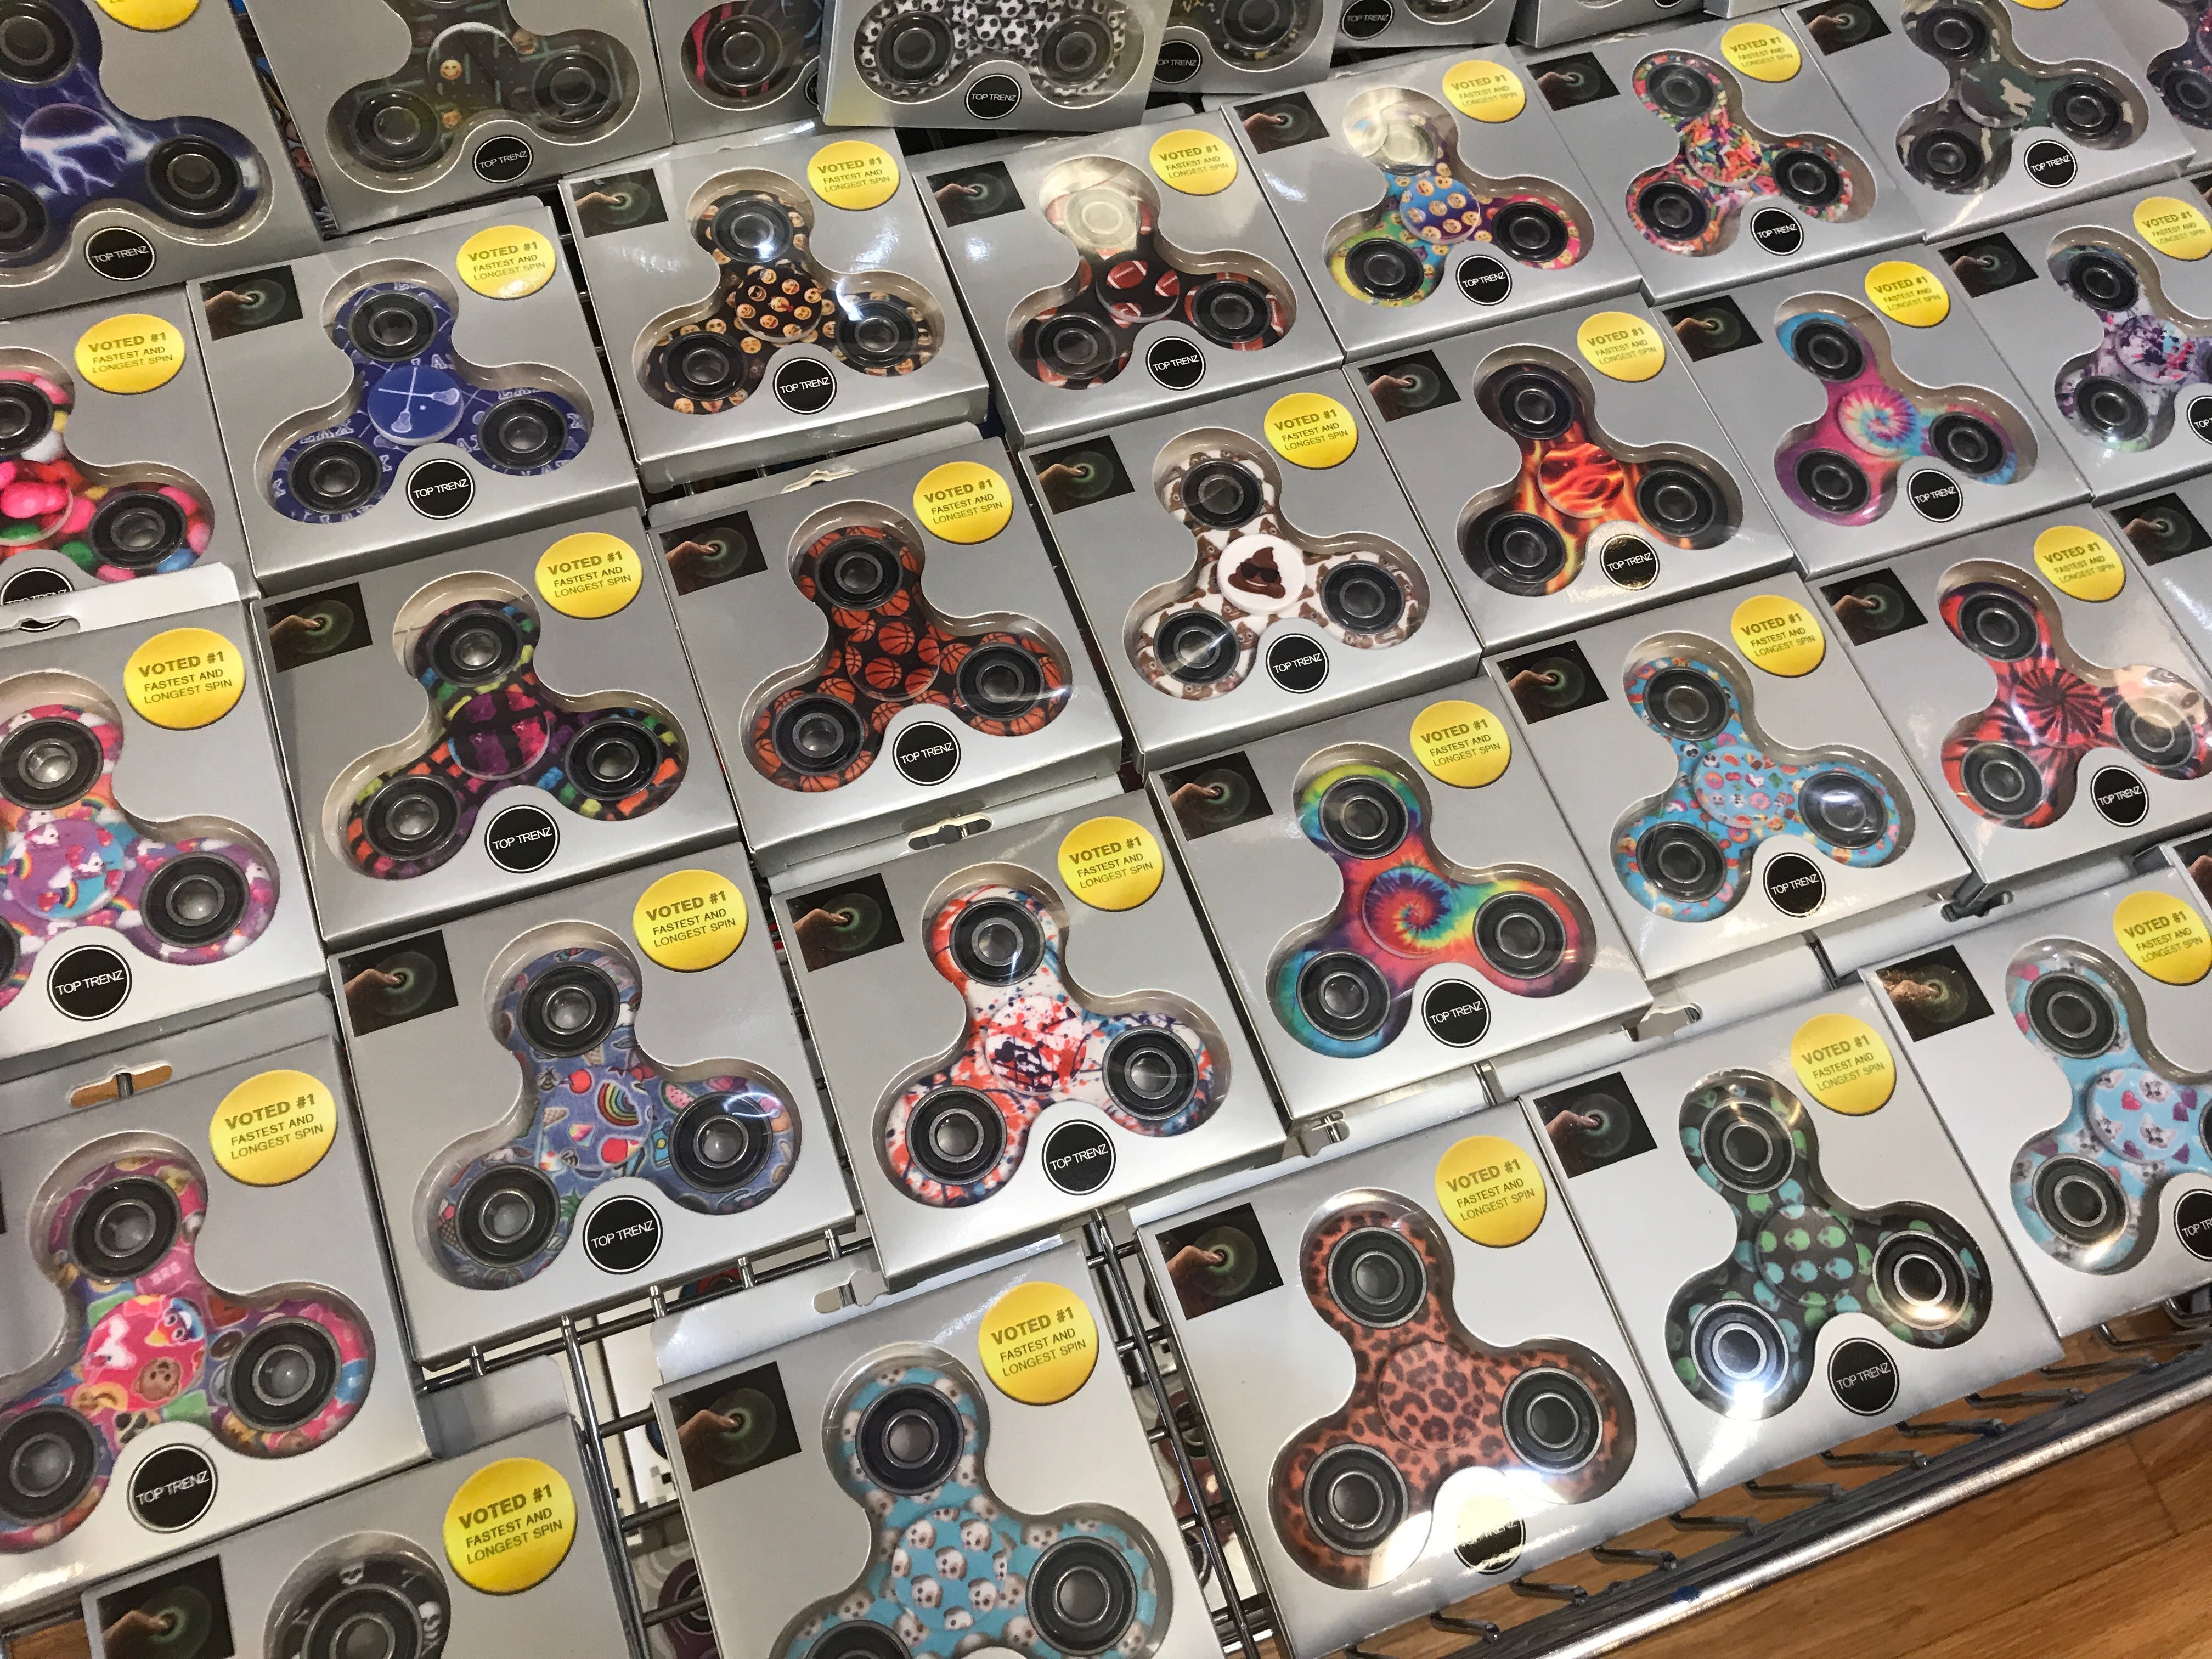 Fidget Spinners: What They Are, How They Work and Why the Controversy